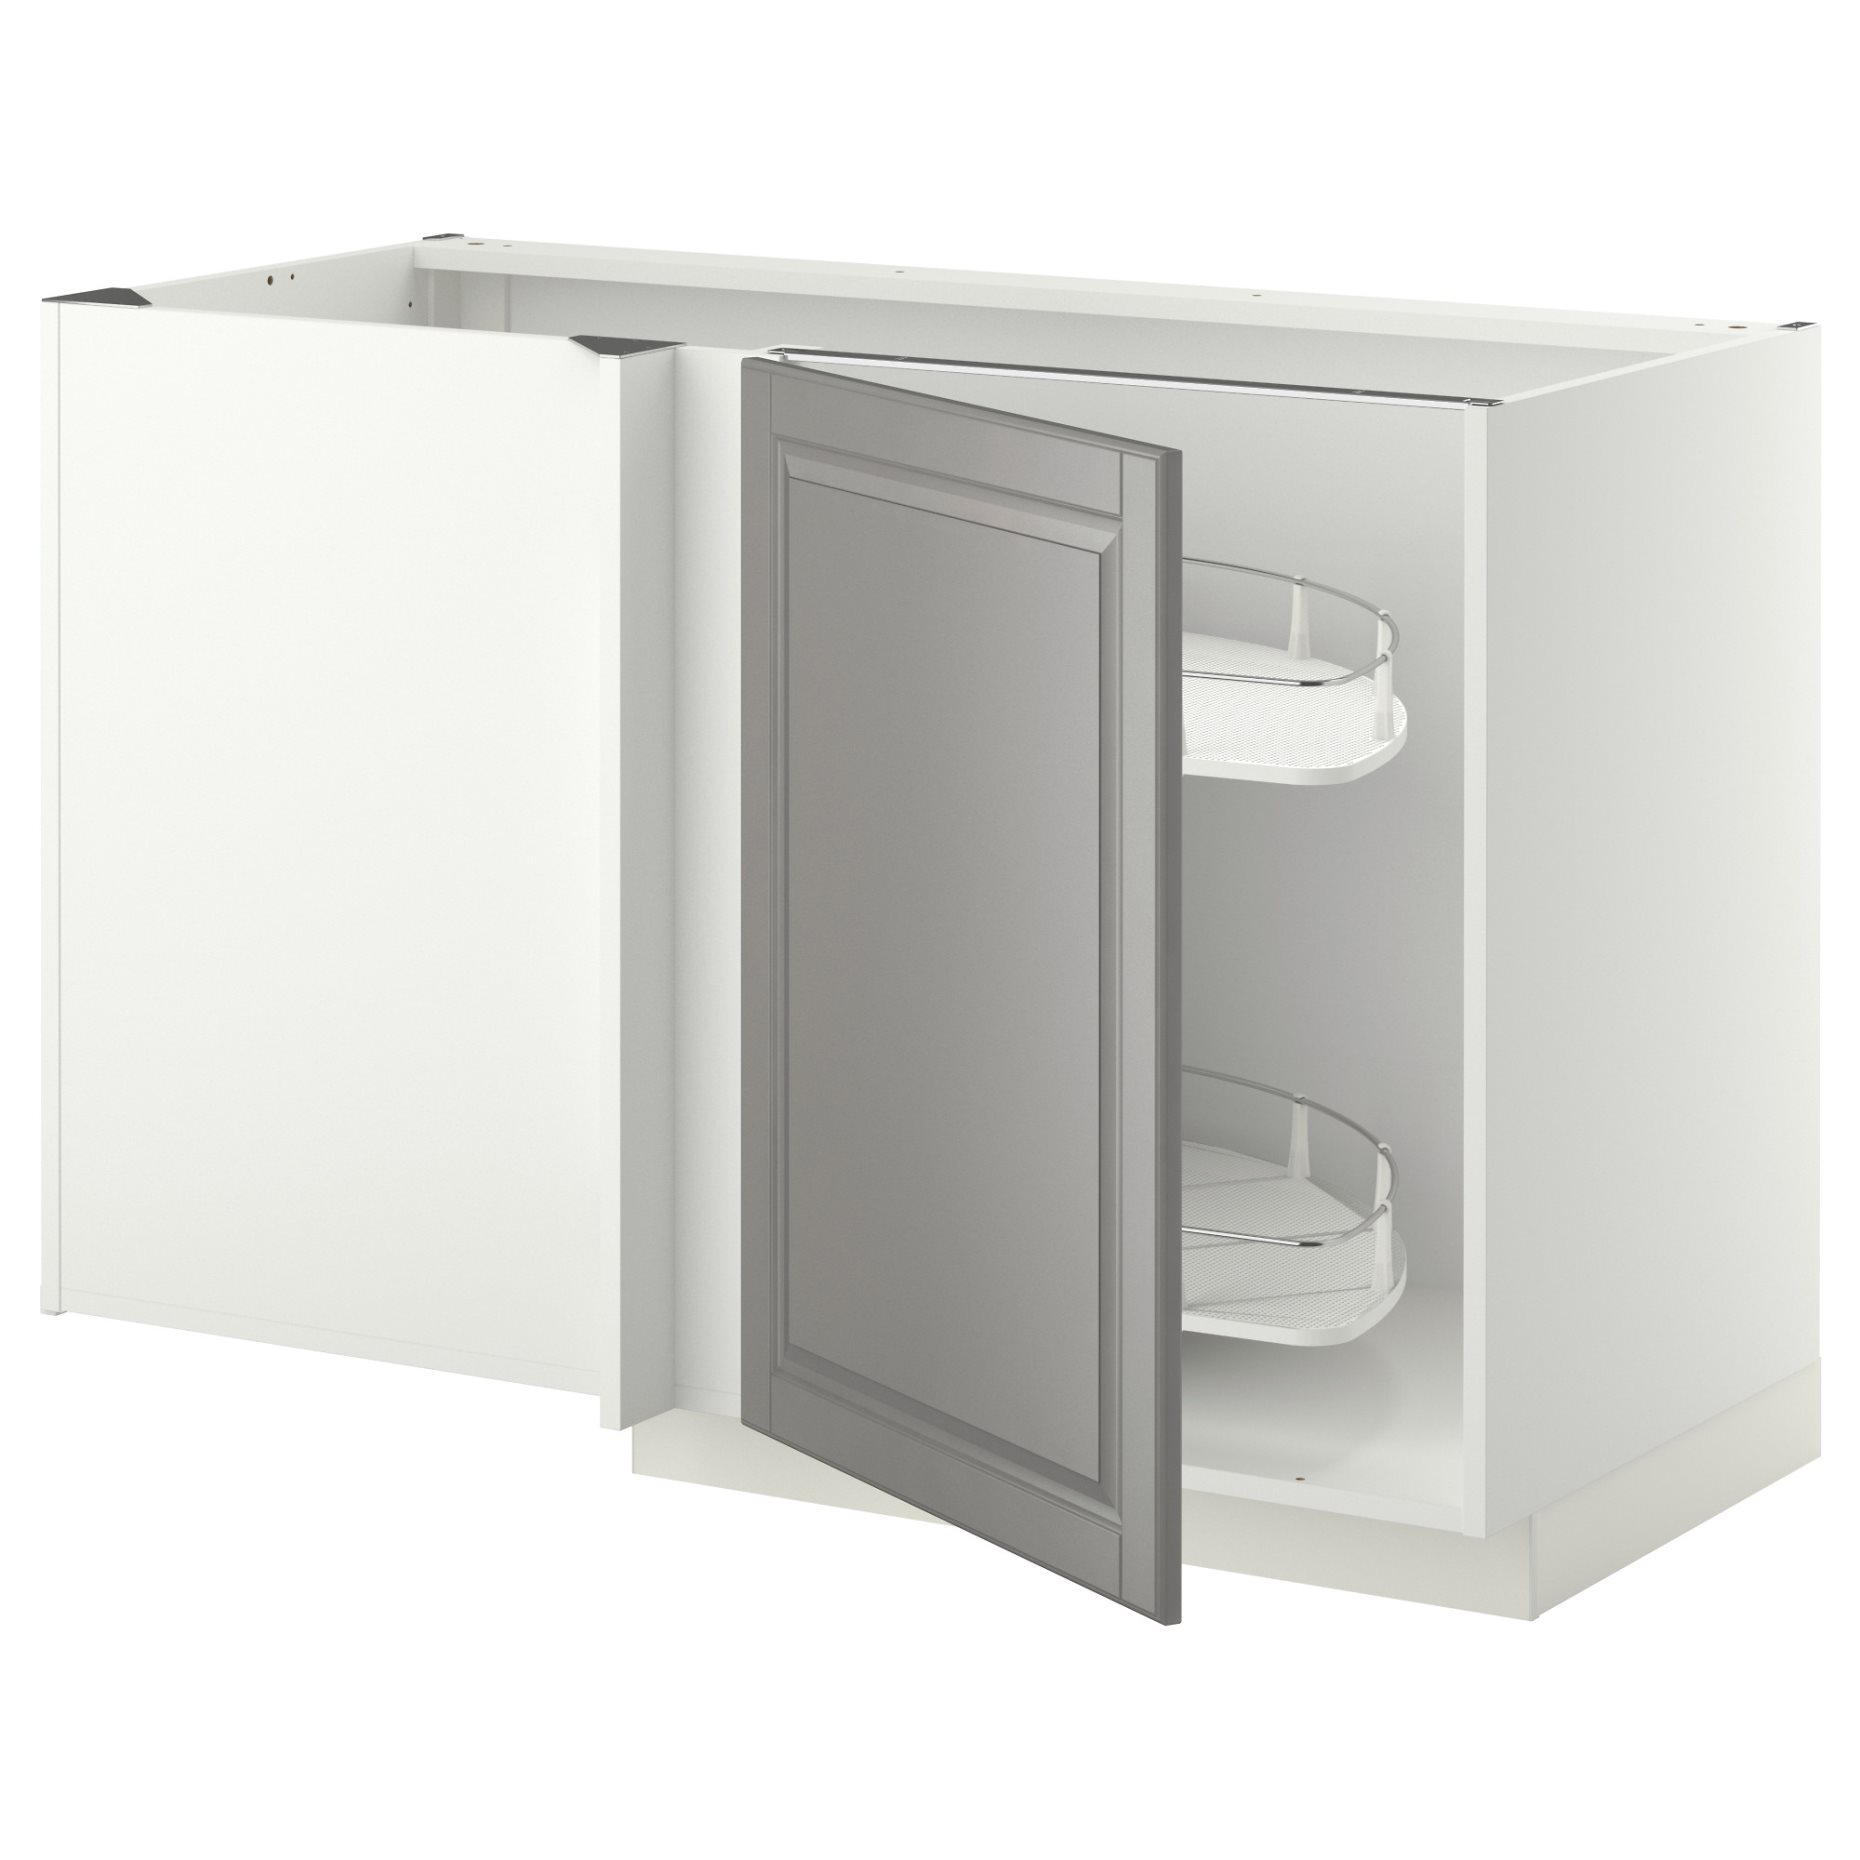 METOD, corner base cabinet with pull-out fitting, 128x68 cm, 094.646.94